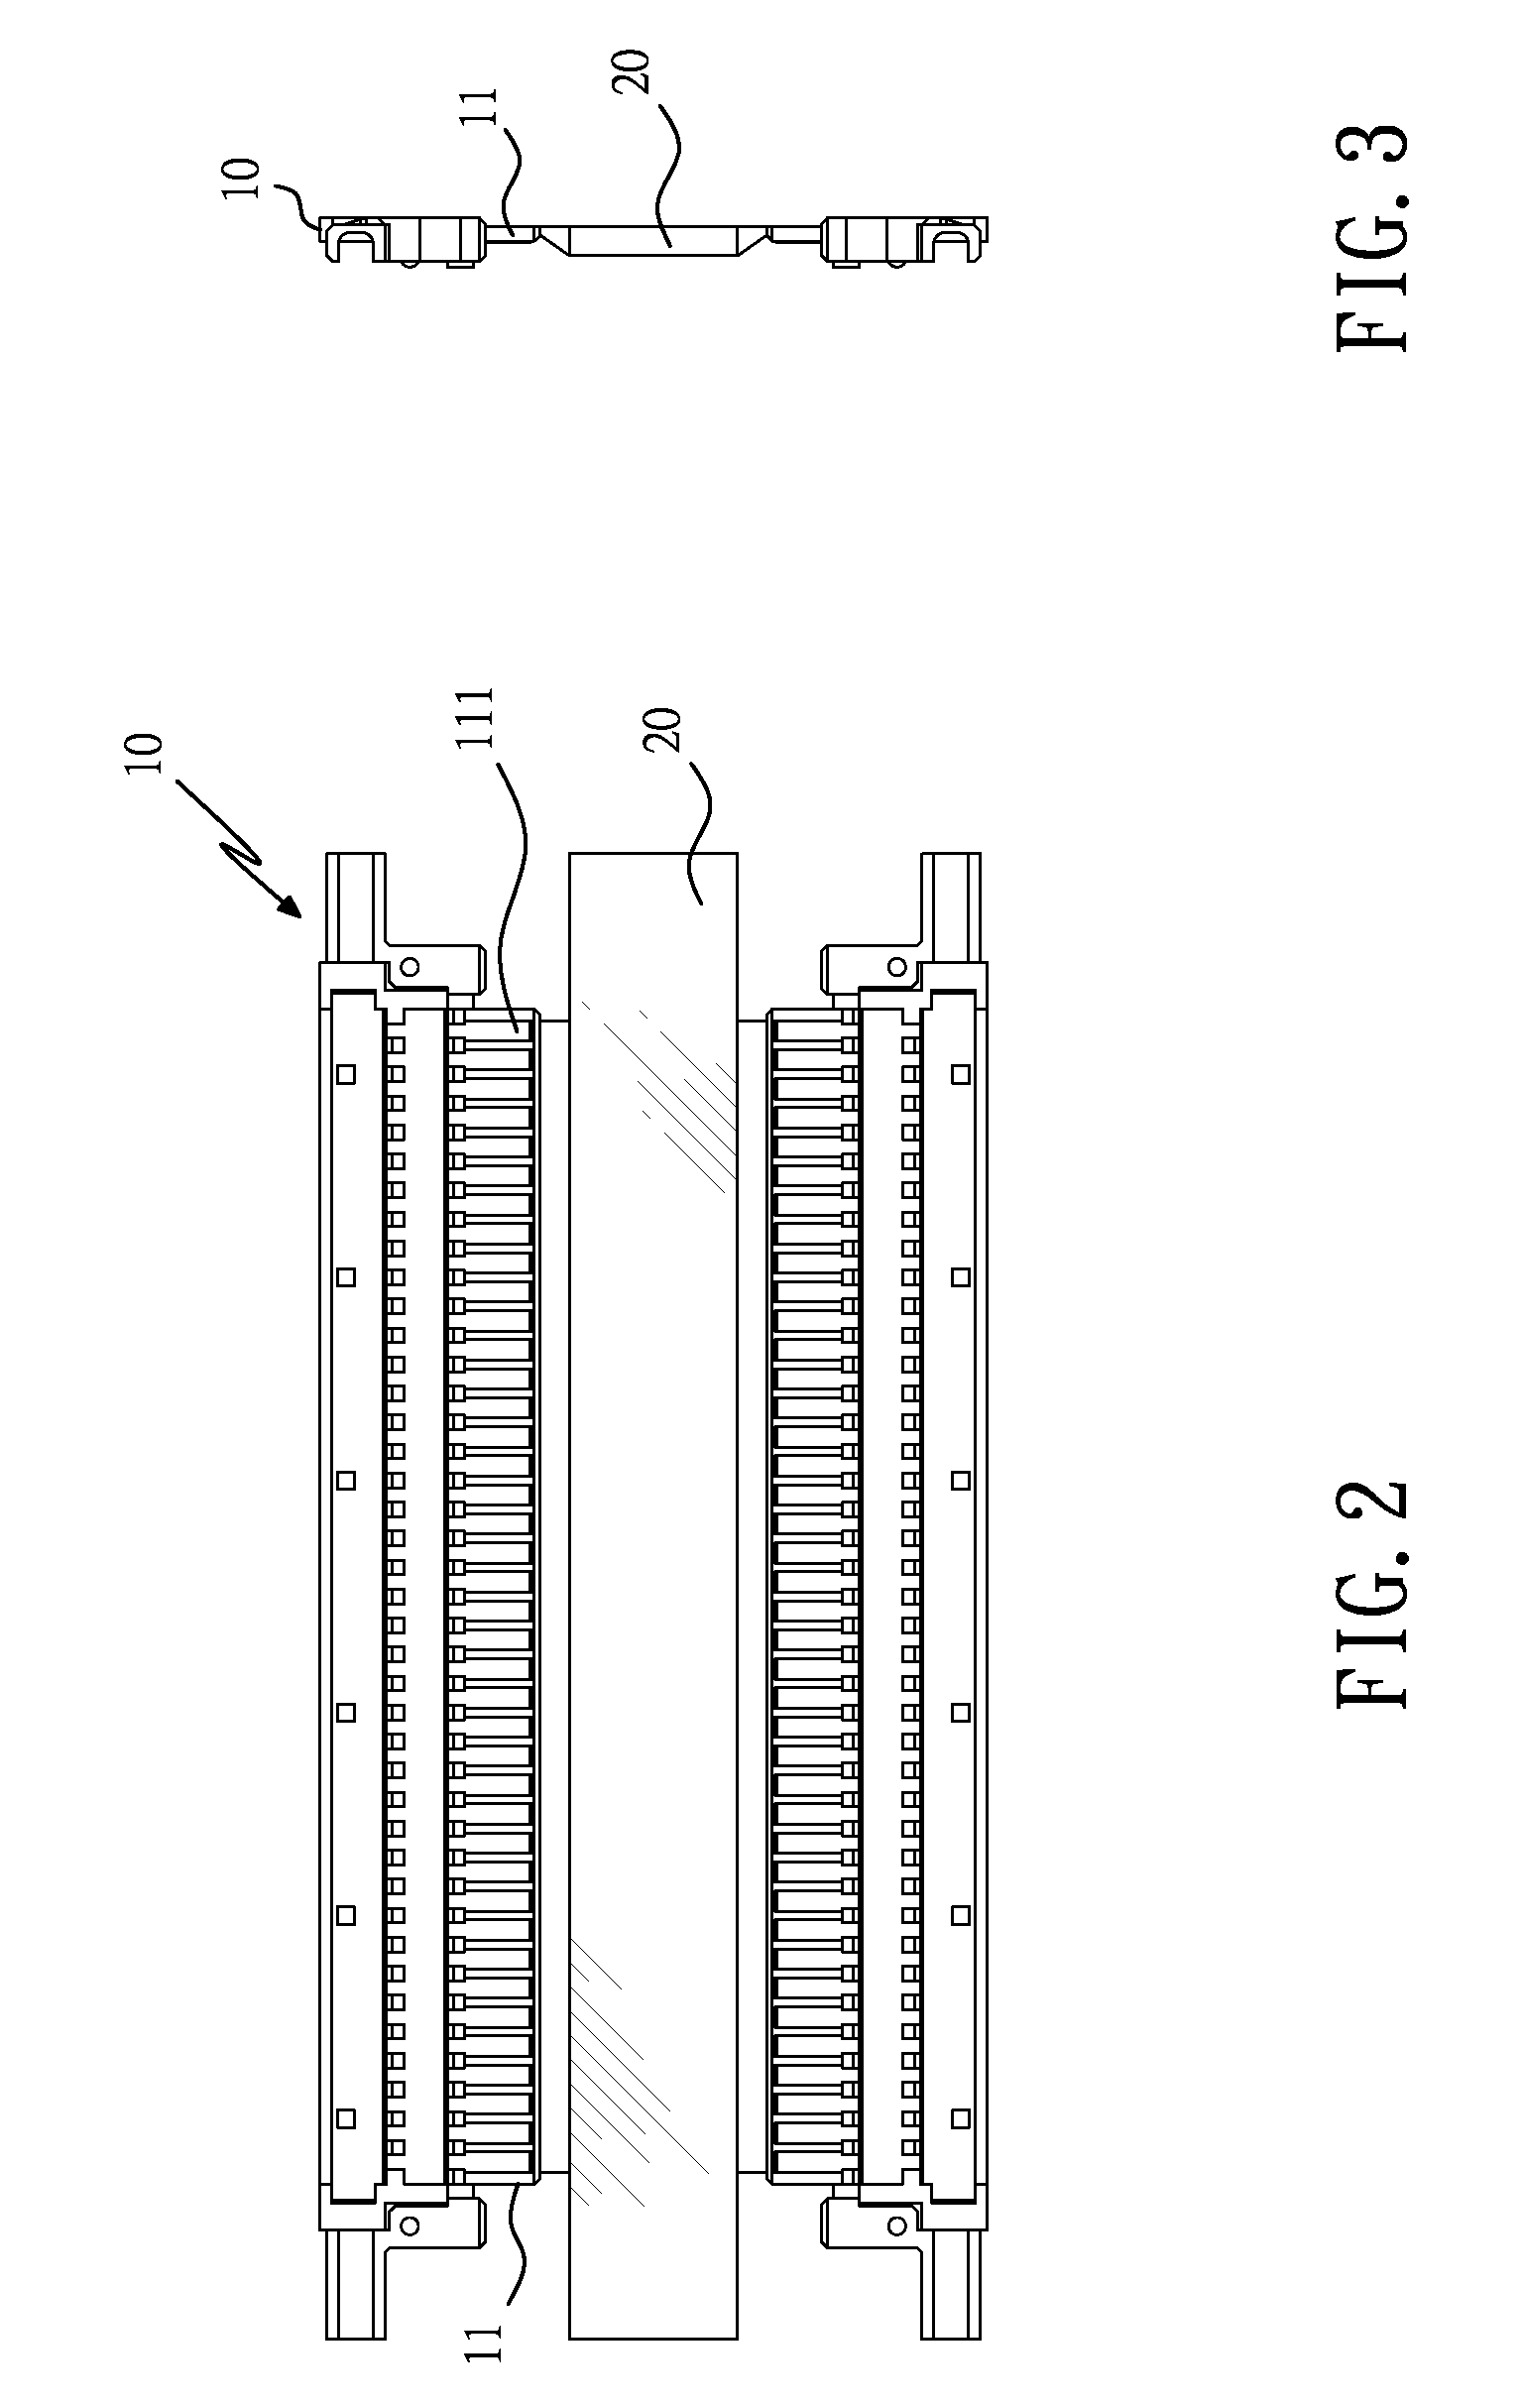 Process of Manufacturing Low-Profile Connector